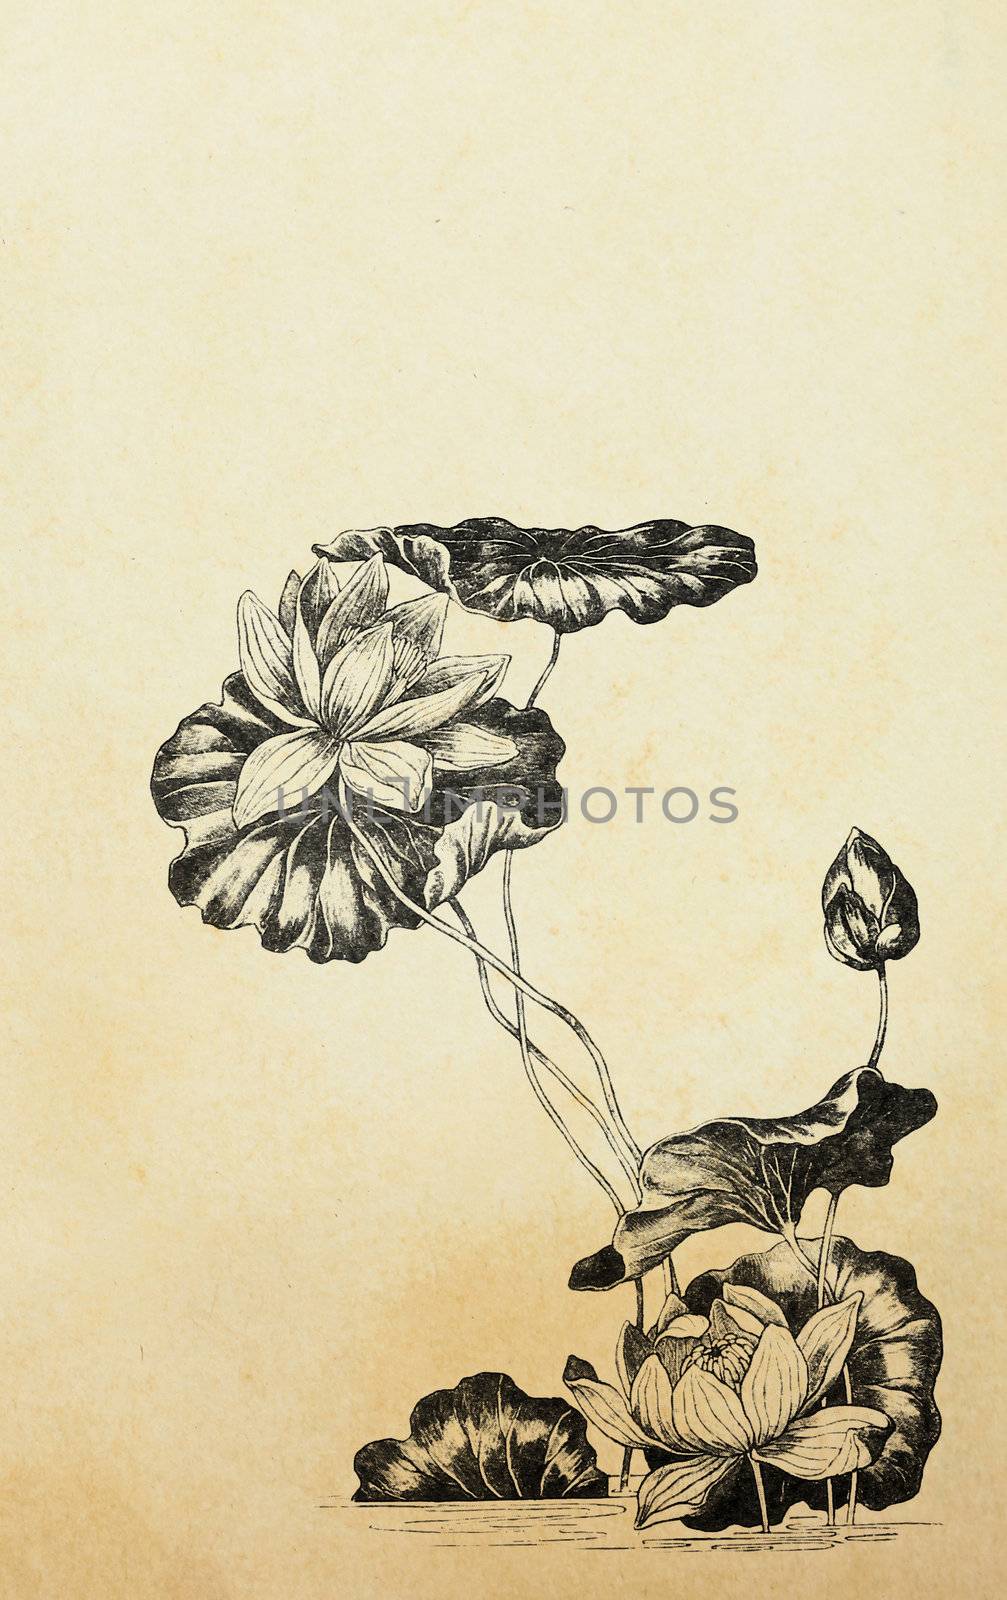 Lotus flowers in art nouveau style on old paper